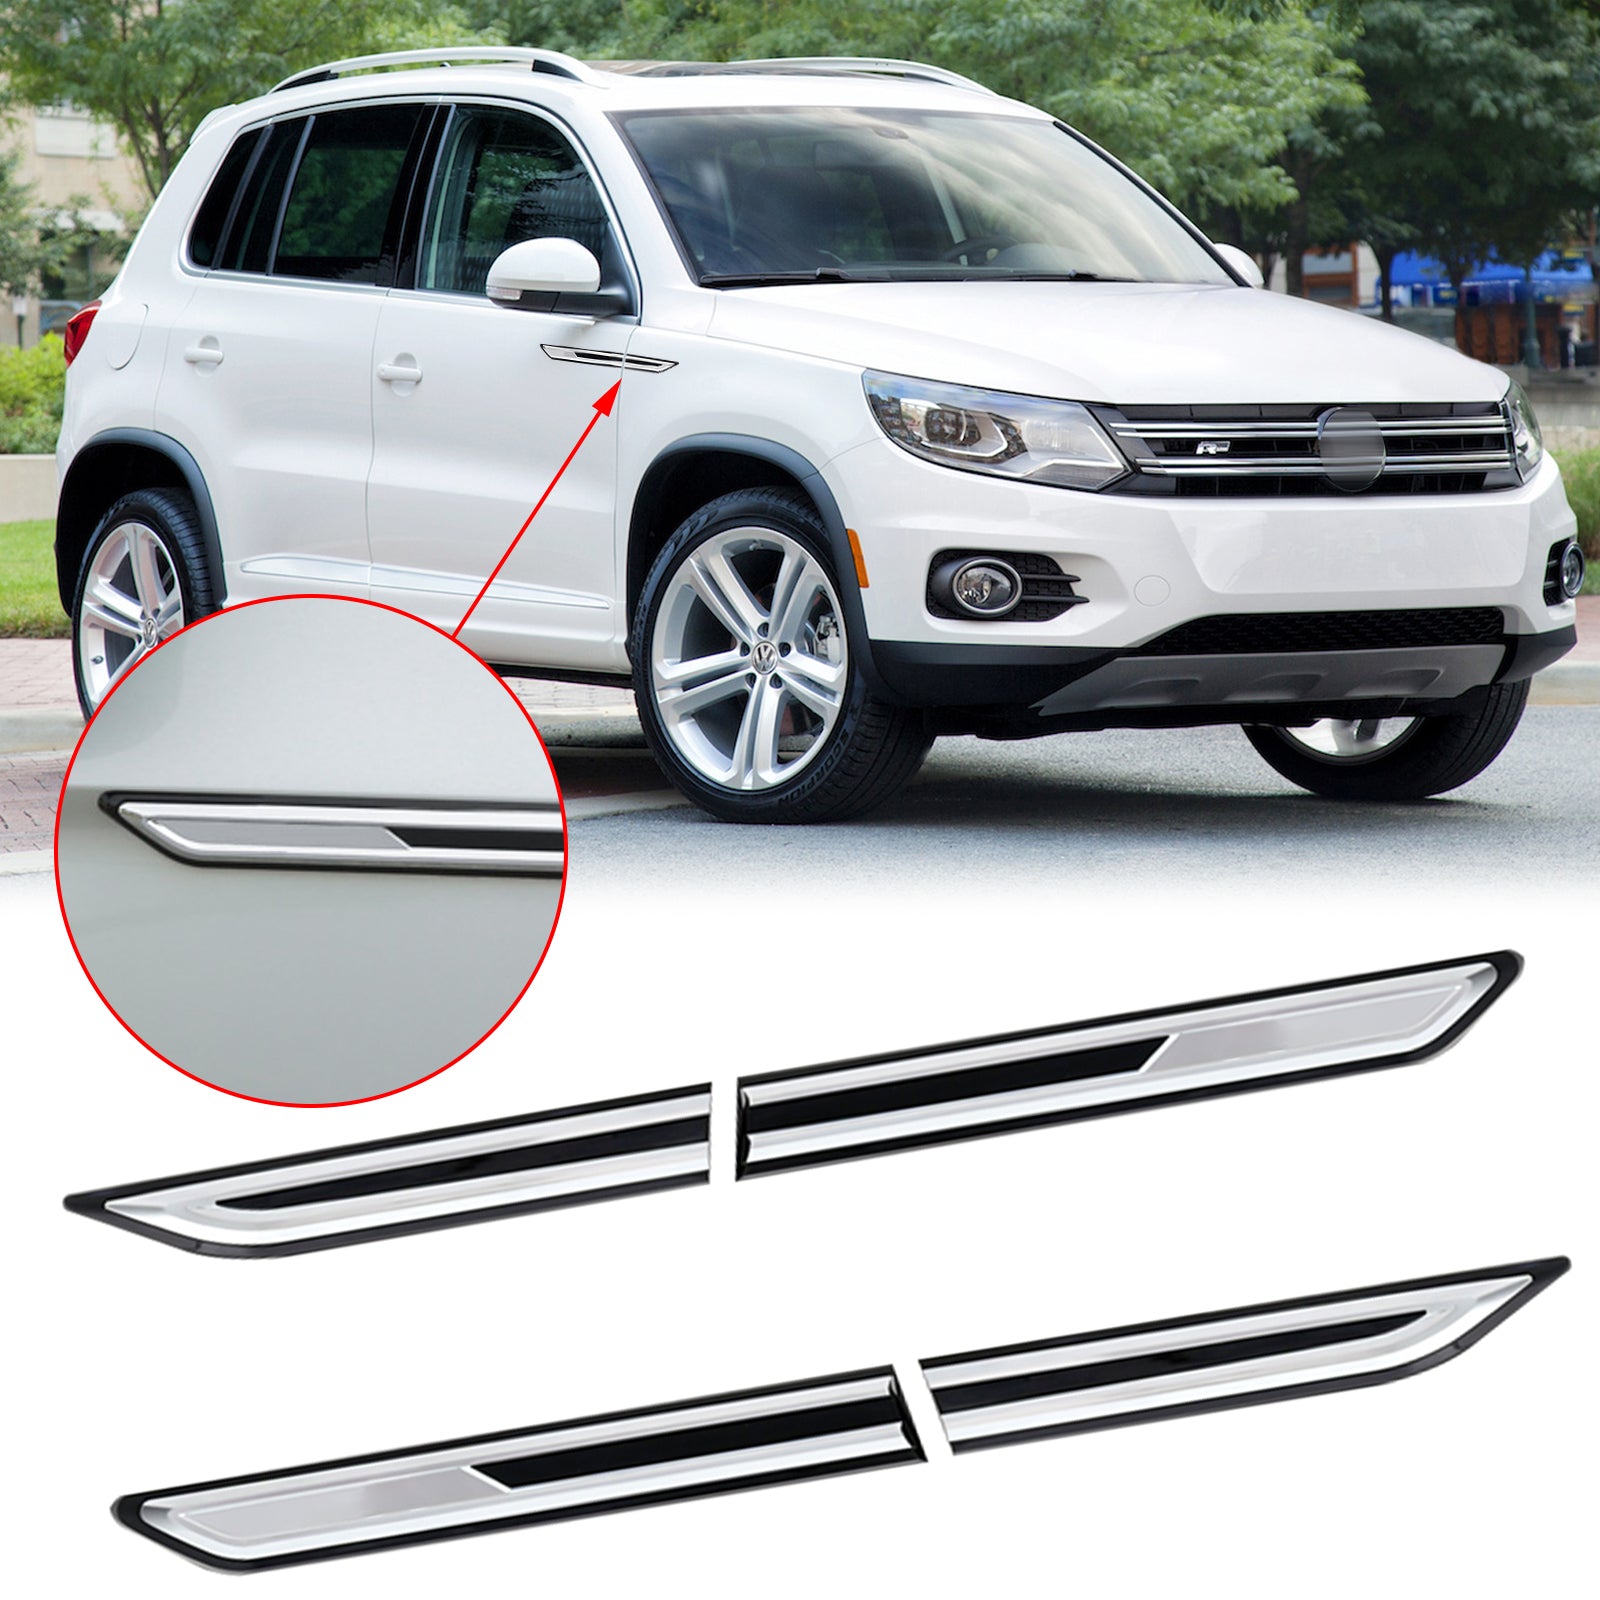 How To Install Tiguan 2 Chrome Accessories